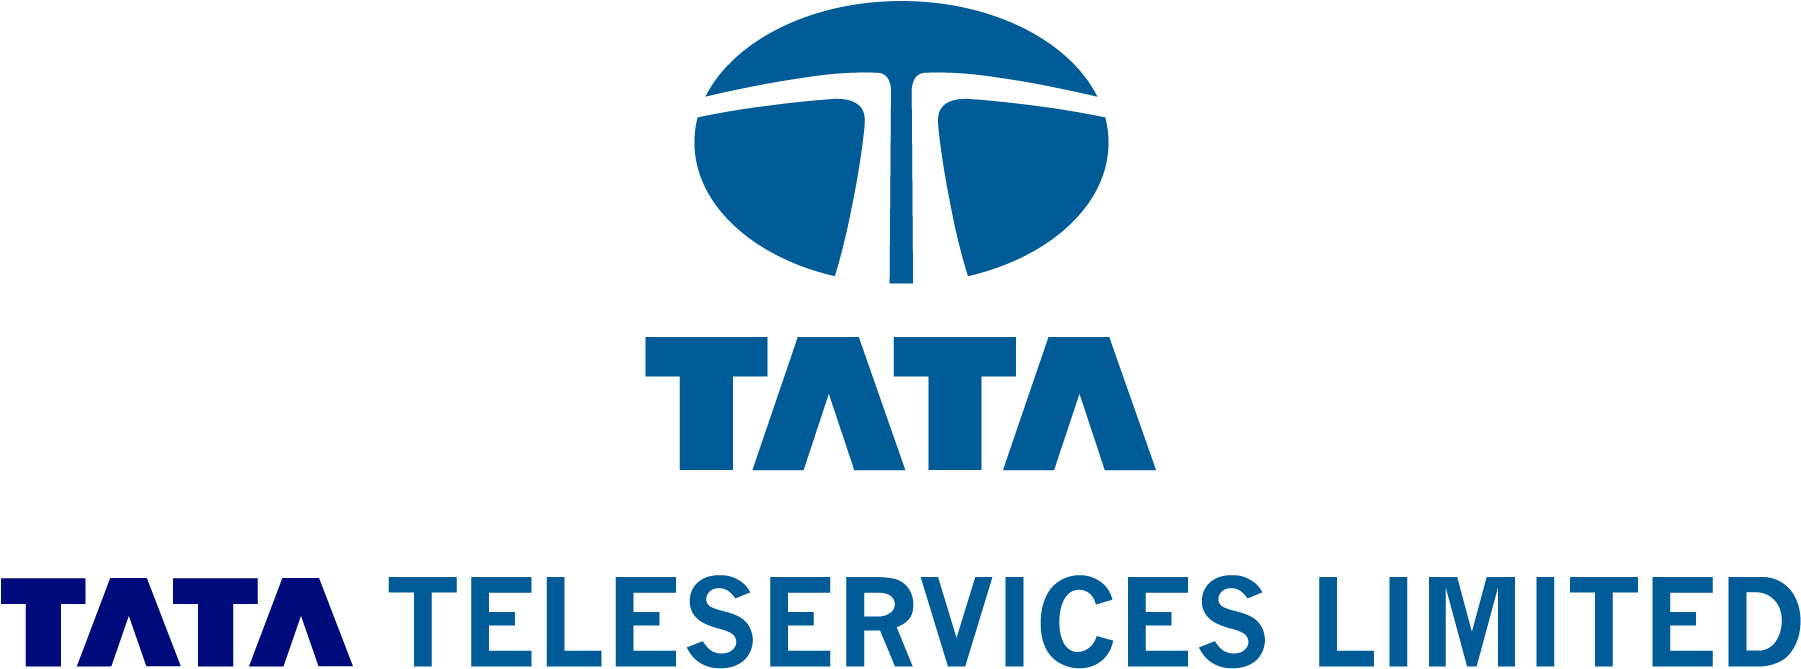 Tata Teleservices Limited Logo PNG